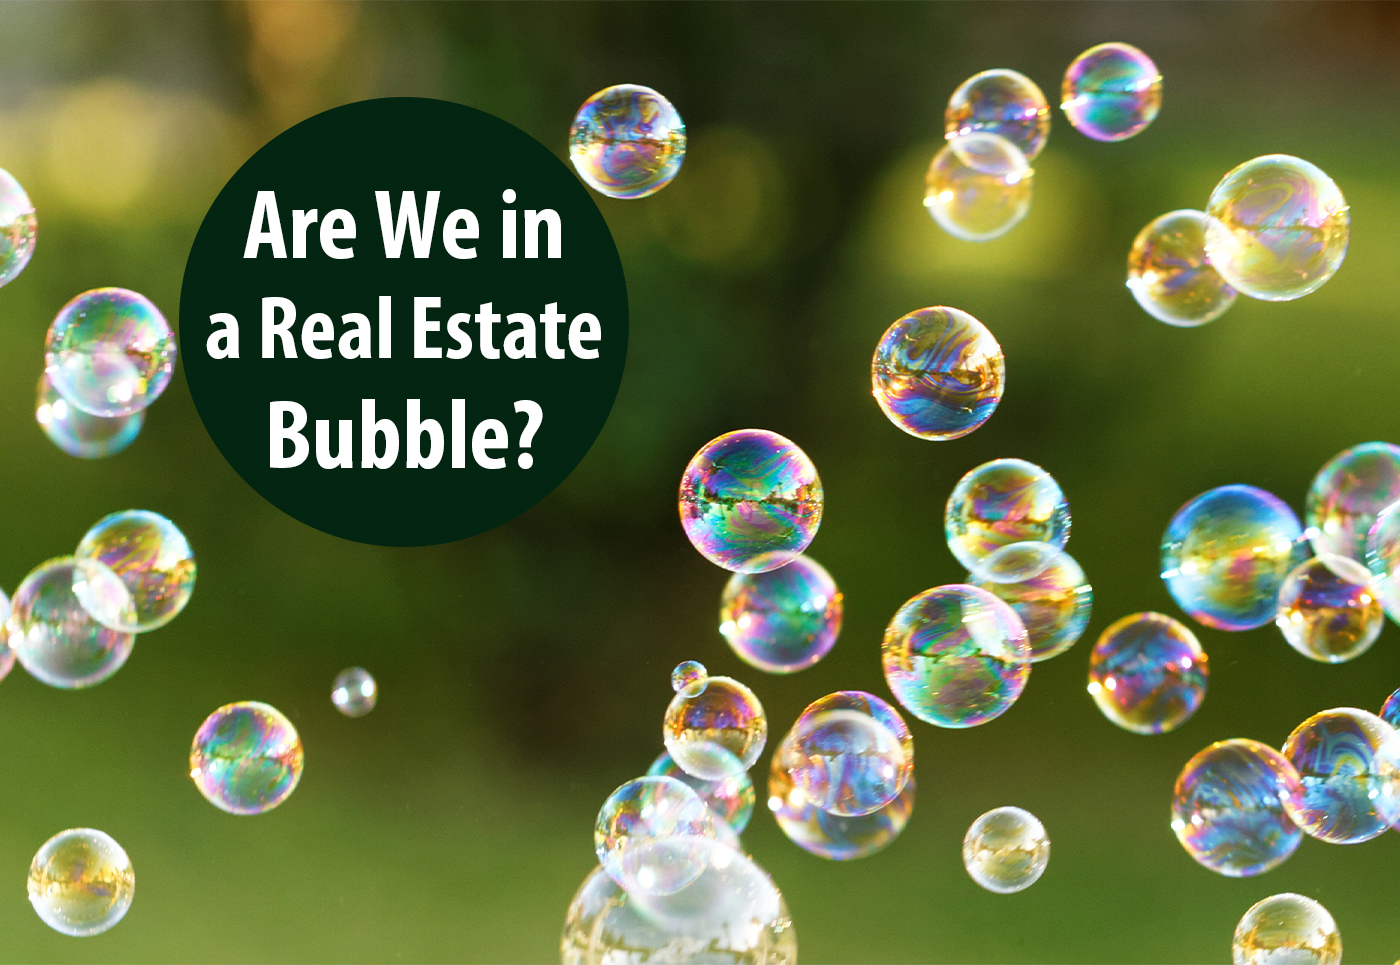 Are we in a real estate bubble